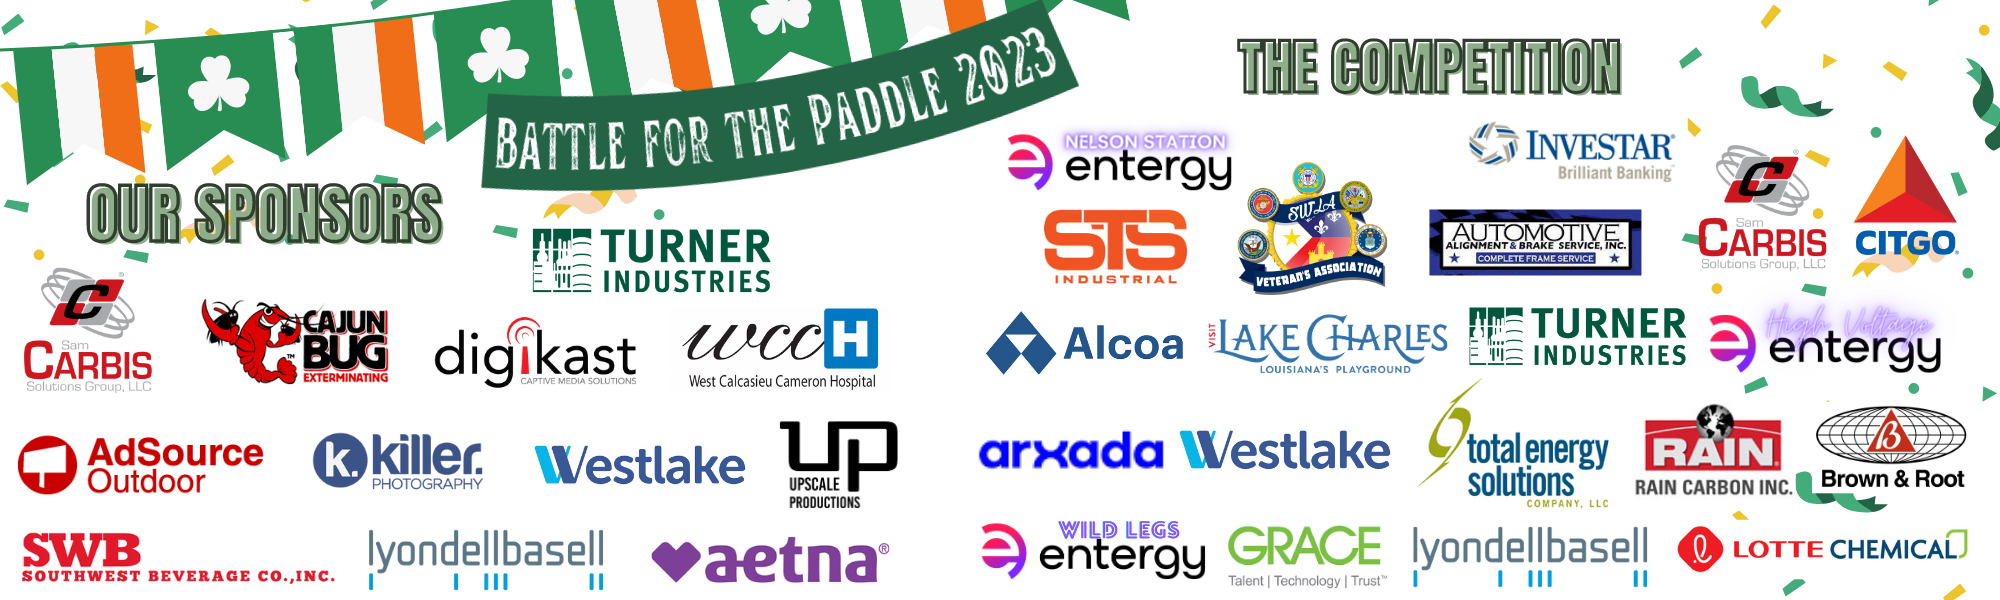 Sponsors and Competitors for Battle for the Paddle 2023